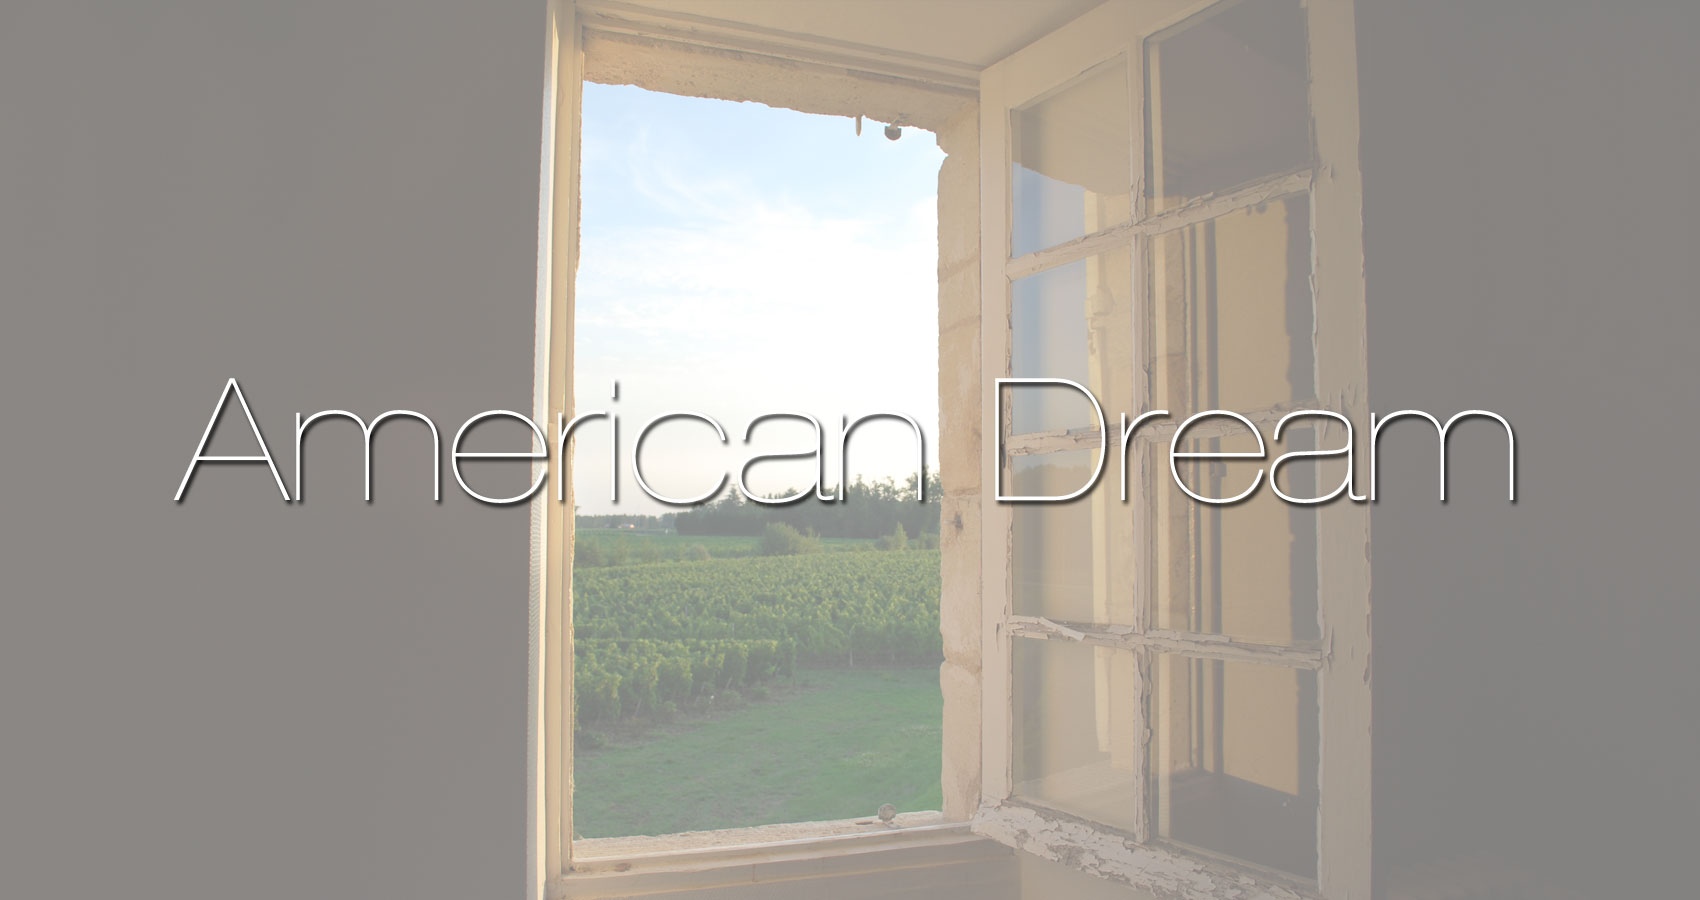 American Dream at Spillwords.com